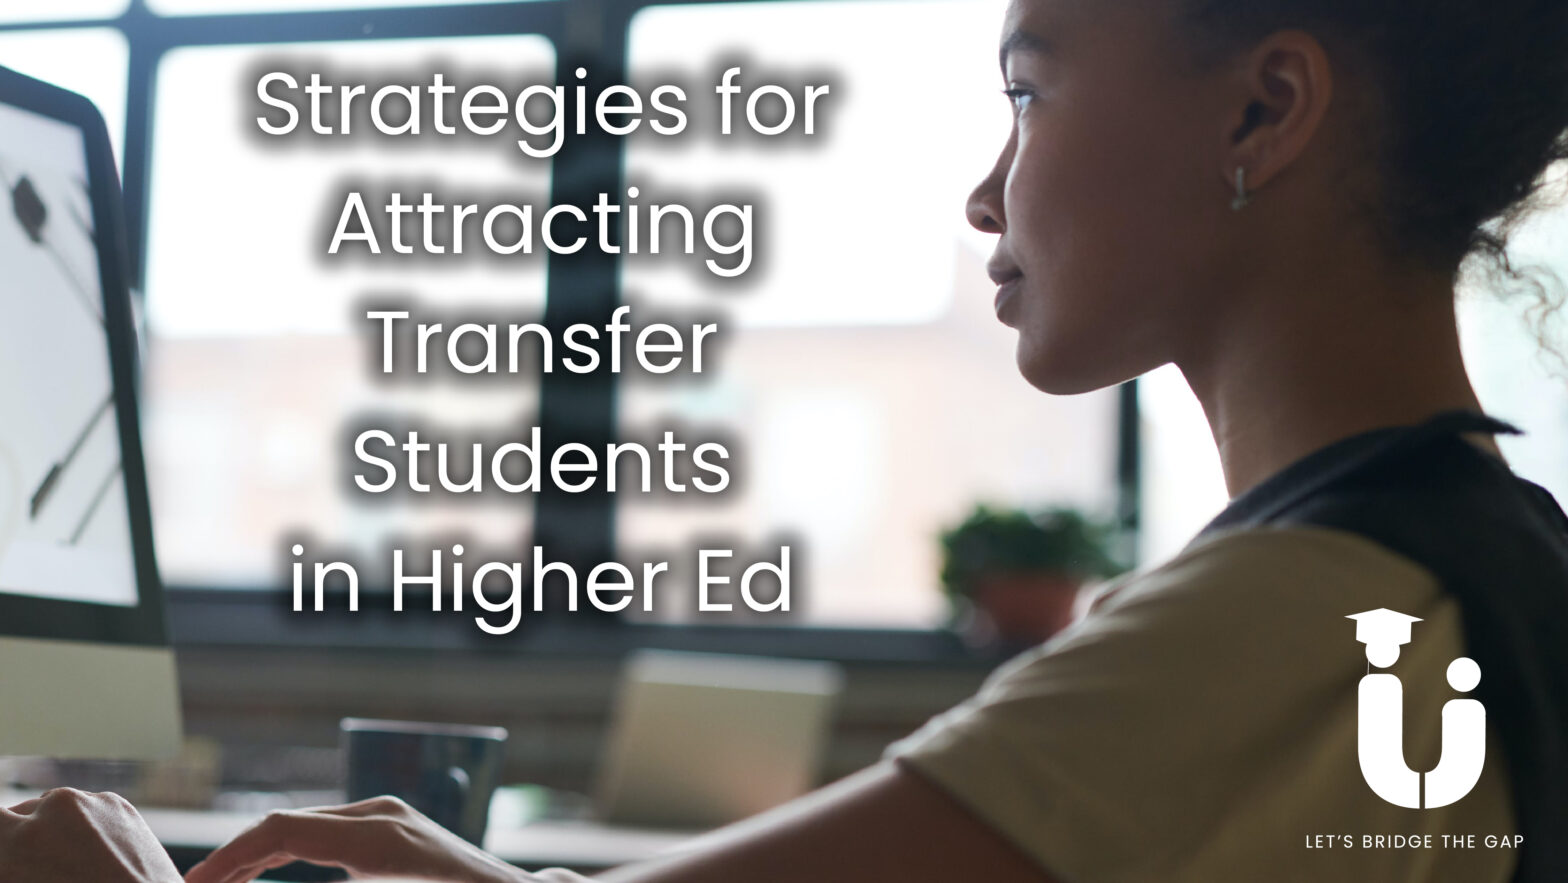 Strategies for Attracting Transfer Students in Higher Ed